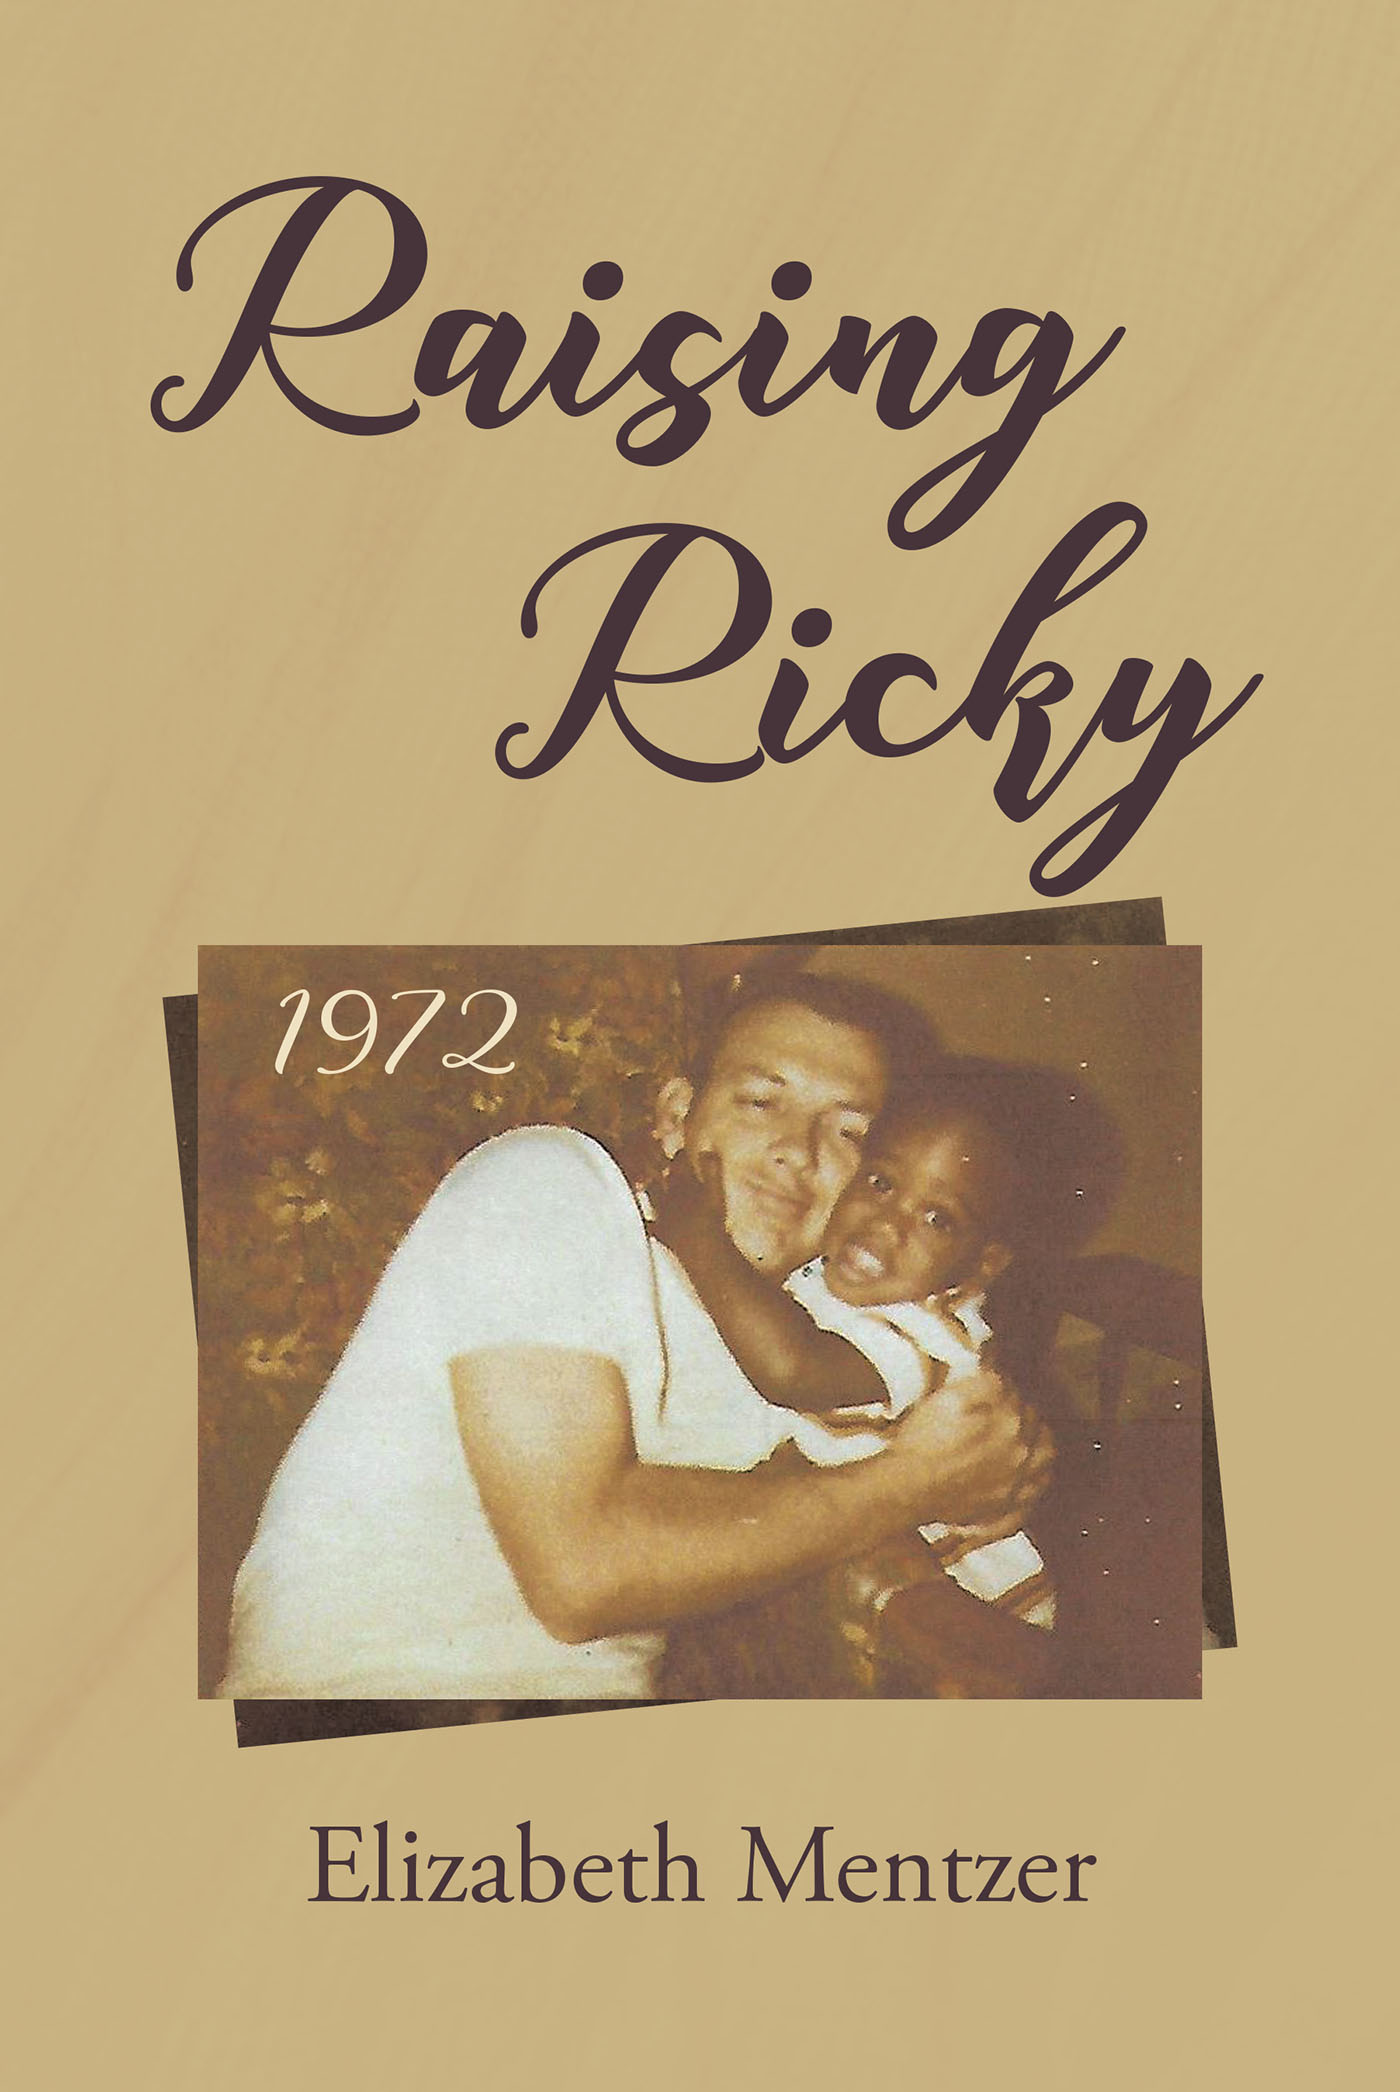 Author Elizabeth Mentzer’s New Book, "Raising Ricky," is the Author’s True Accounting of Her Family’s Adoption of a Black Child in the Early 1970s